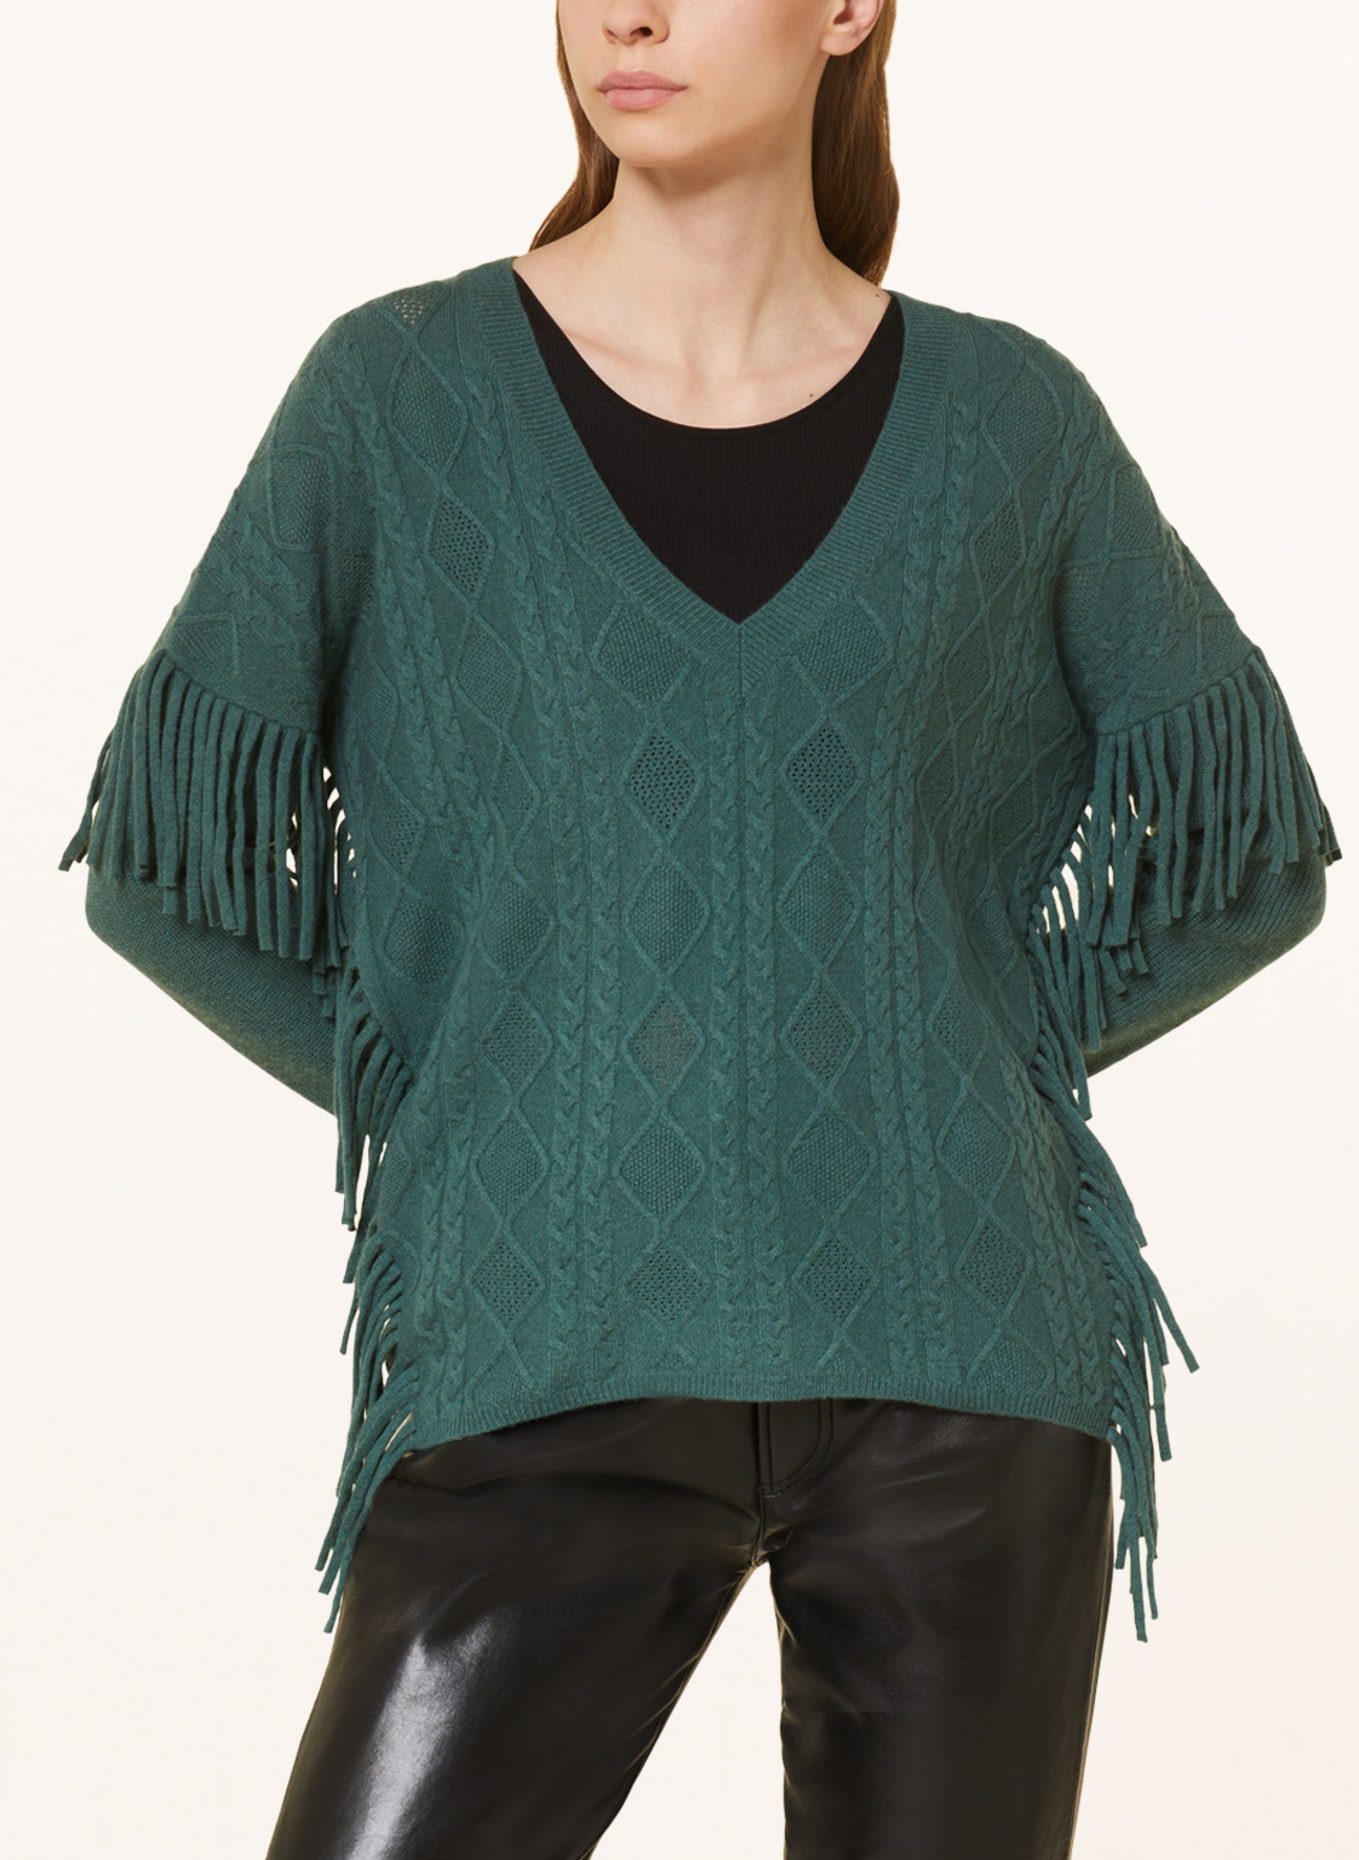 Princess GOES HOLLYWOOD Oversized sweater, Color: DARK GREEN (Image 4)